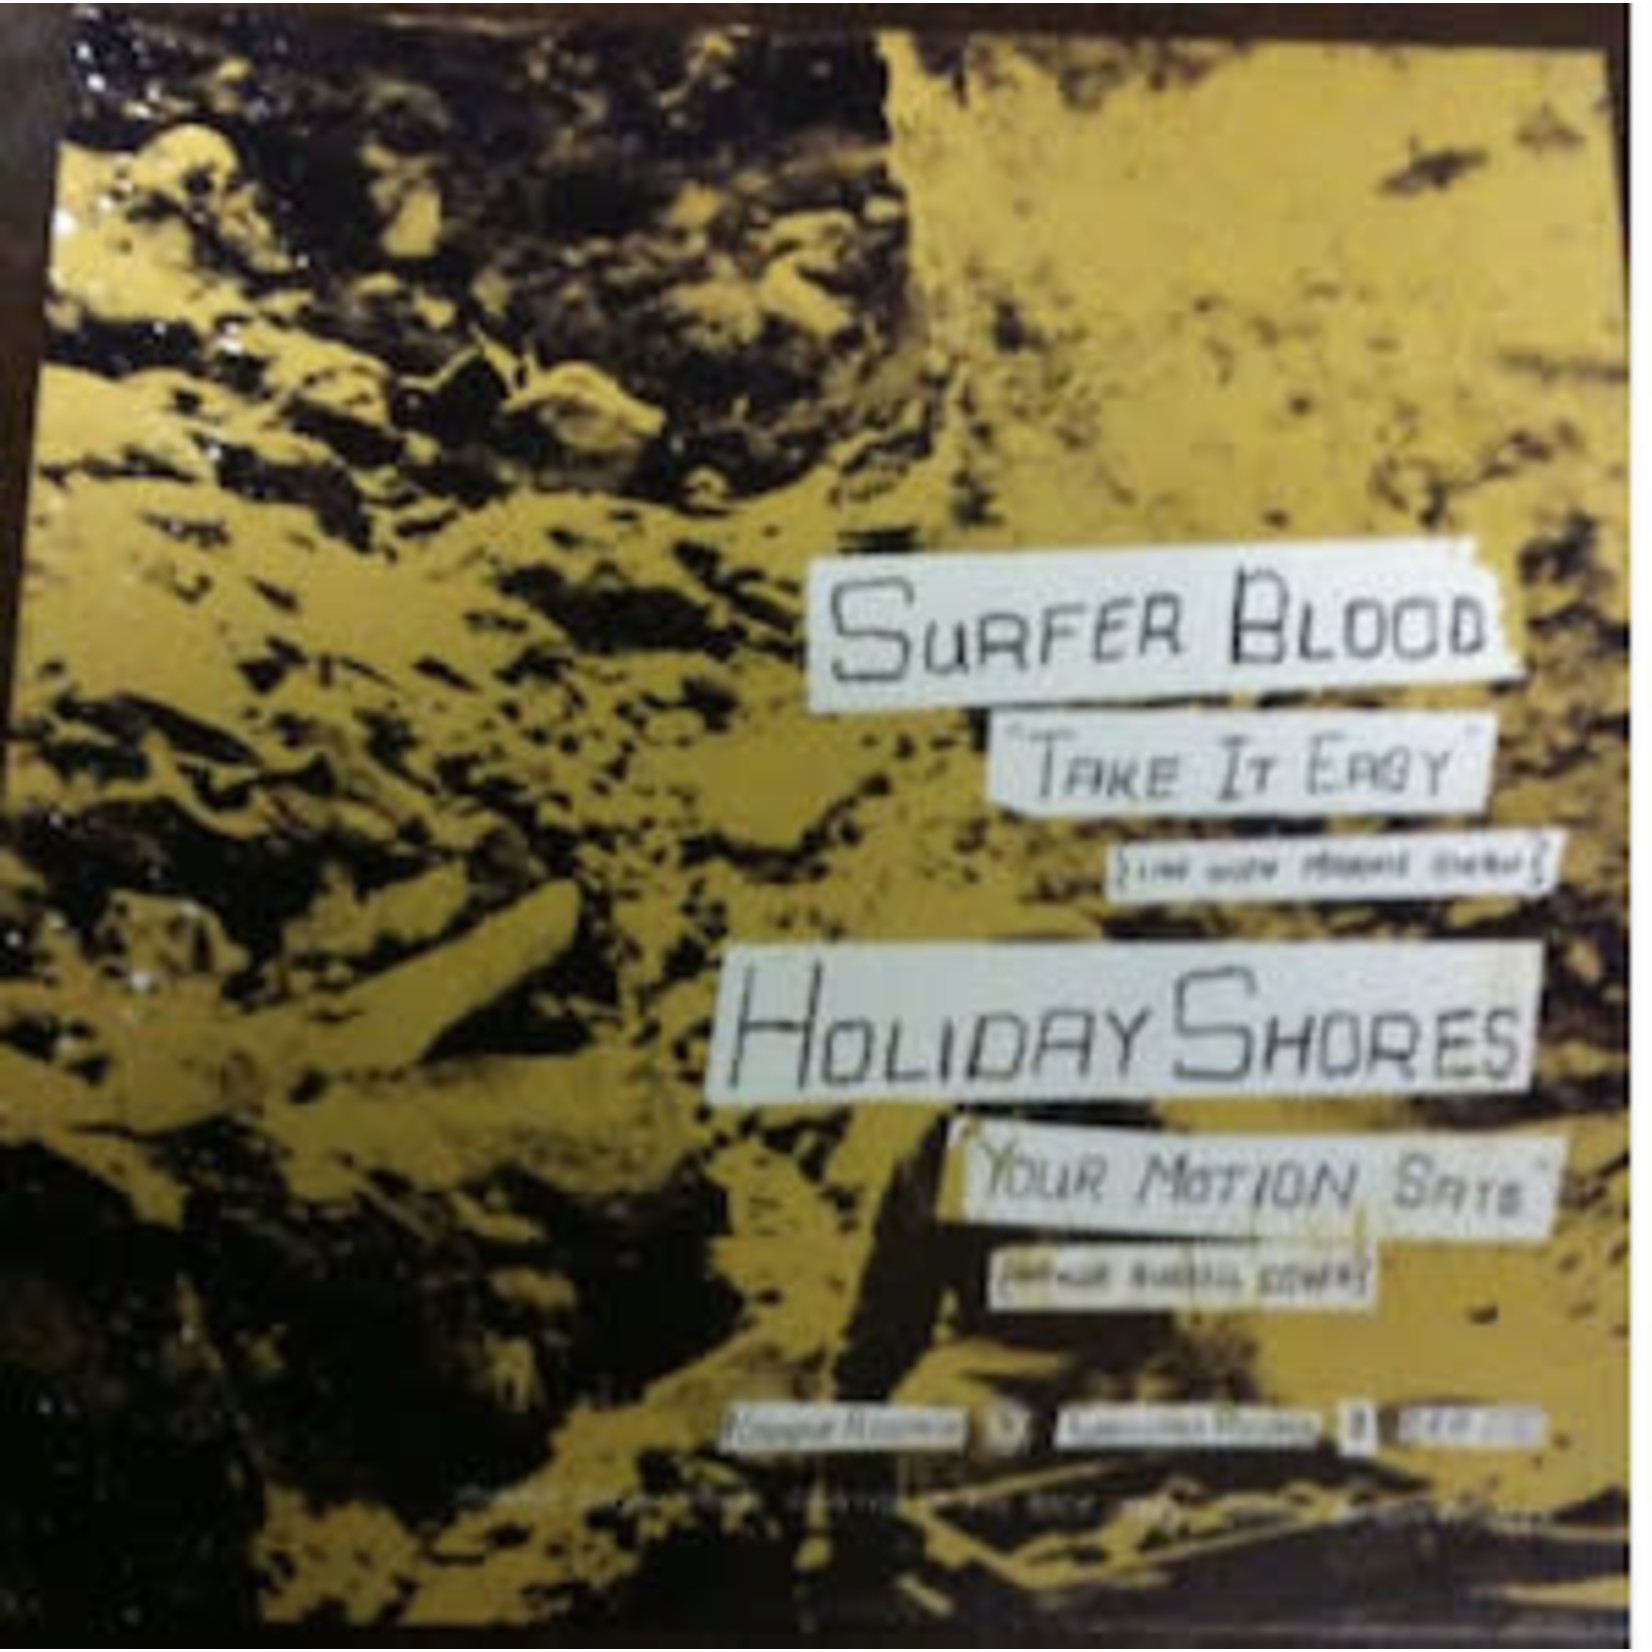 Kanine Surfer Blood / Holiday Shores - Your Motion Says / Take It Easy (7")